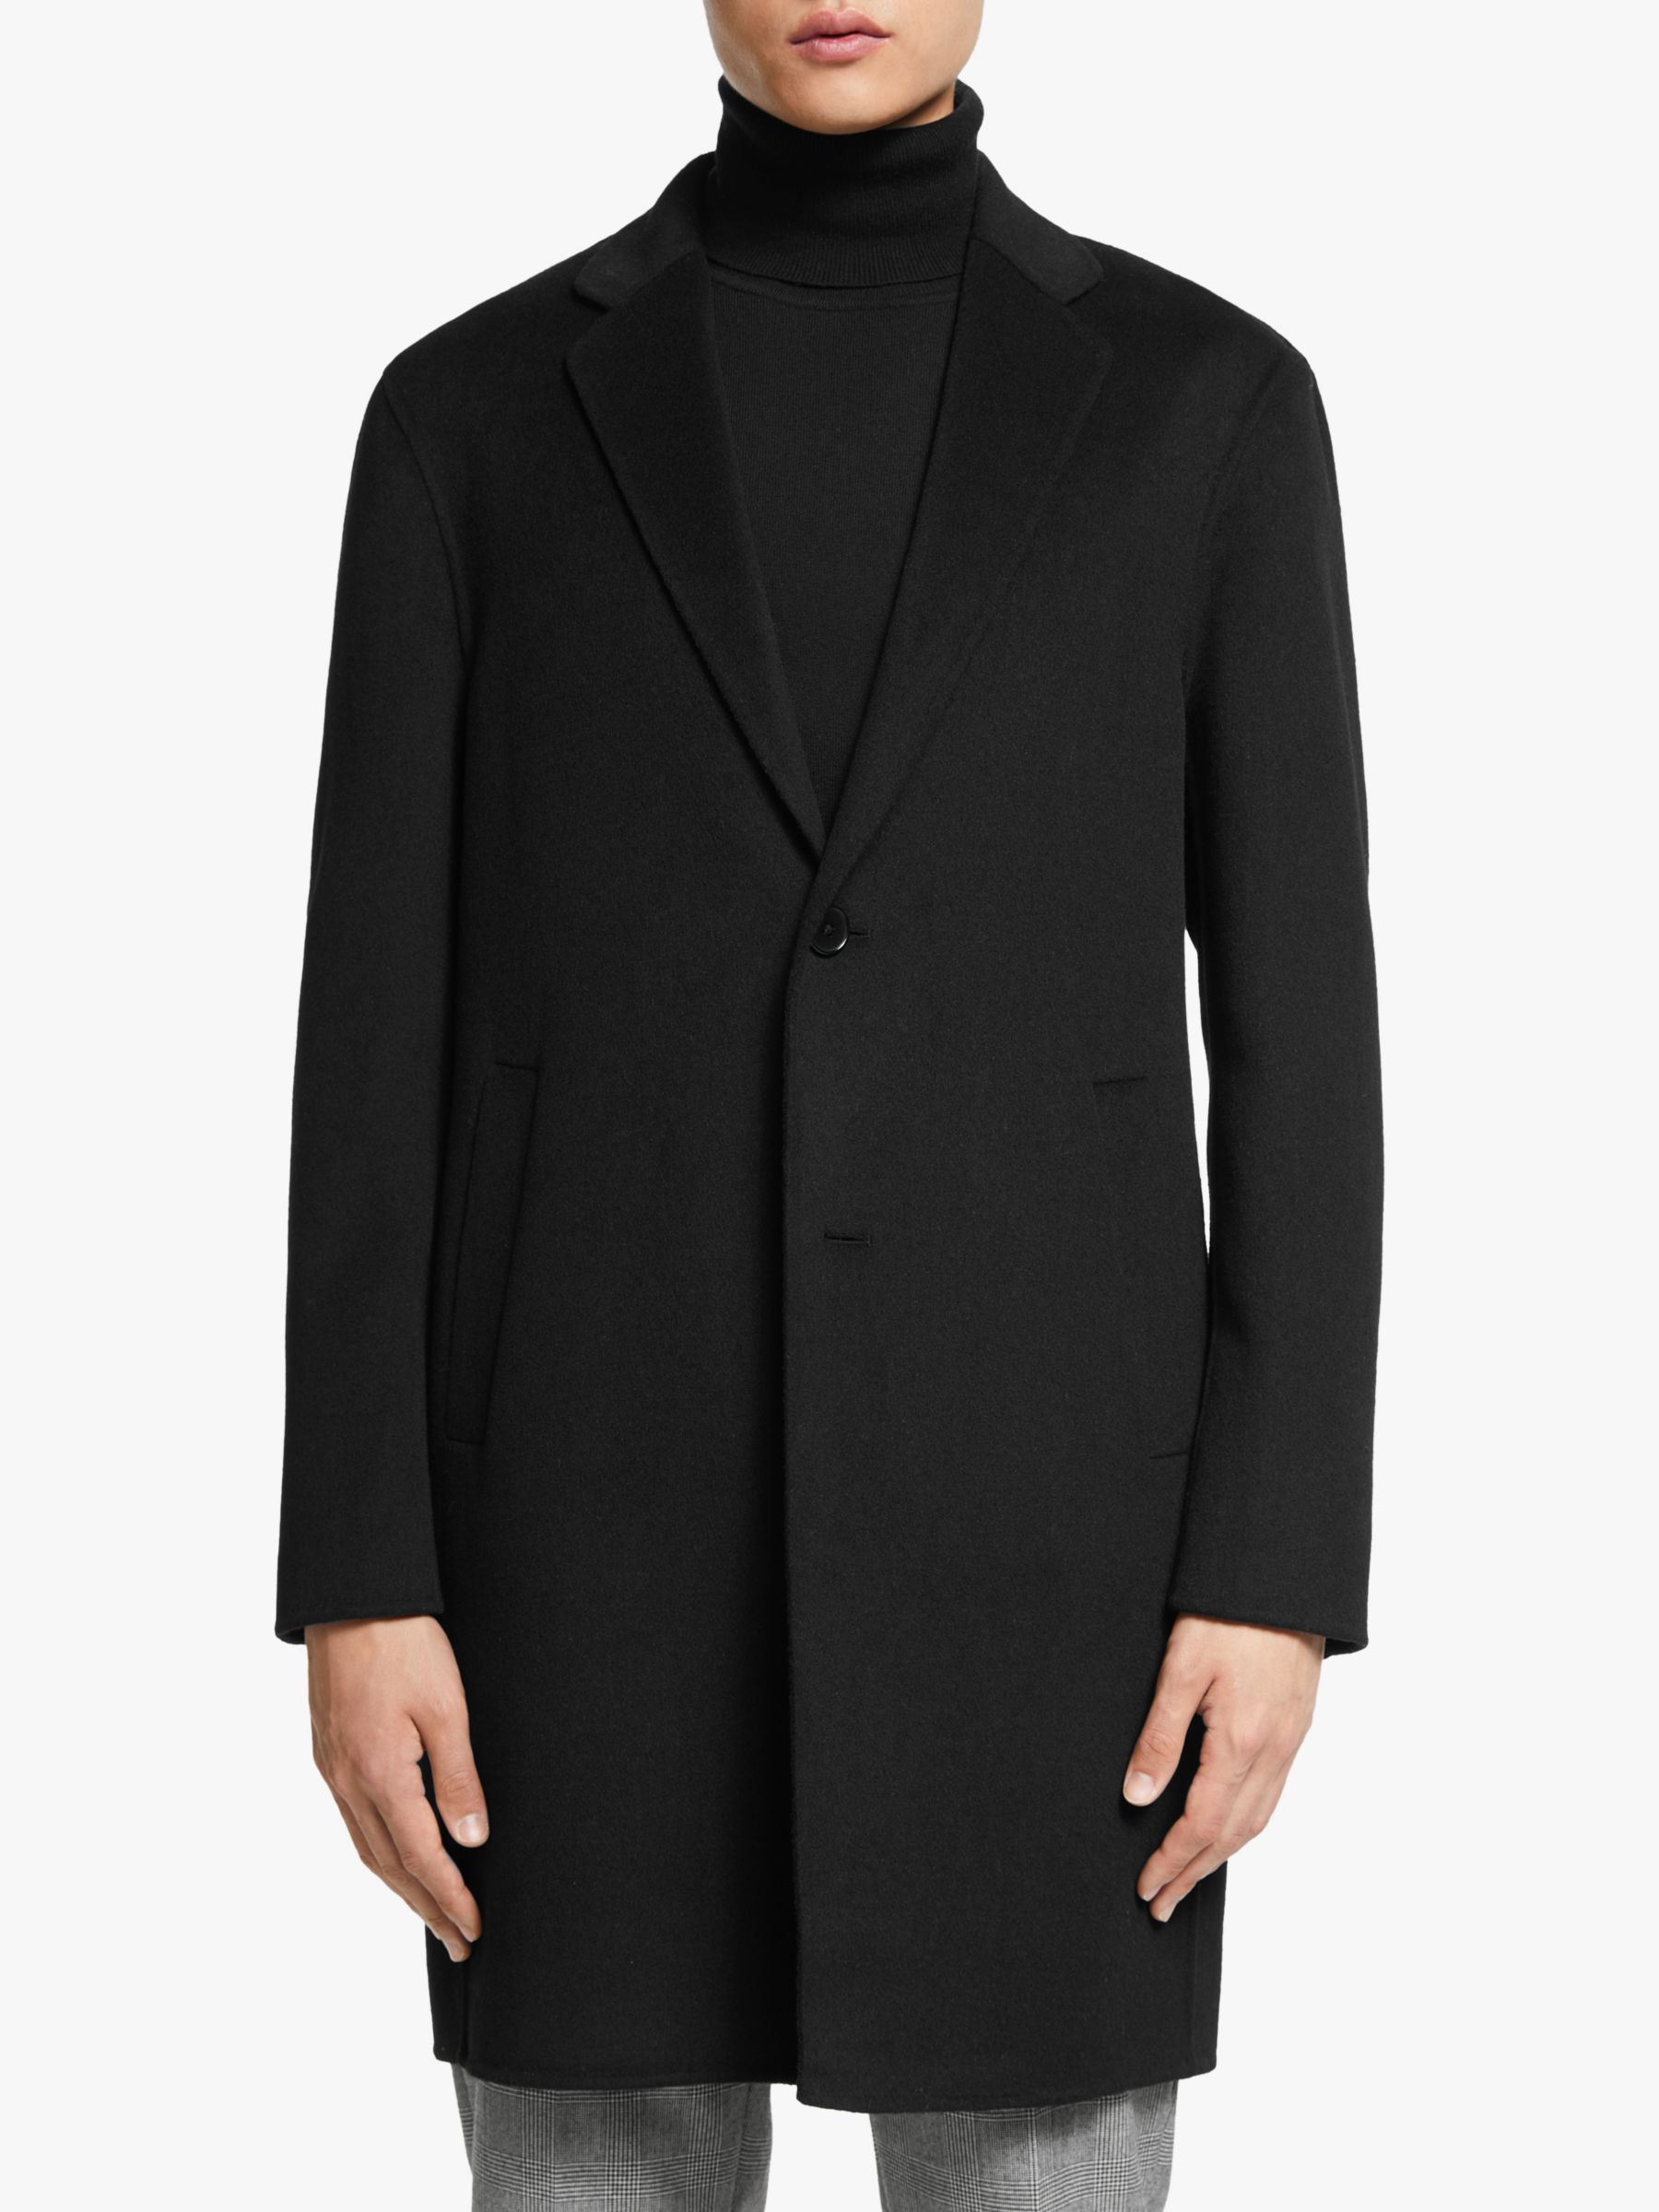 Kin Double Faced Wool Blend Overcoat, Black at John Lewis & Partners